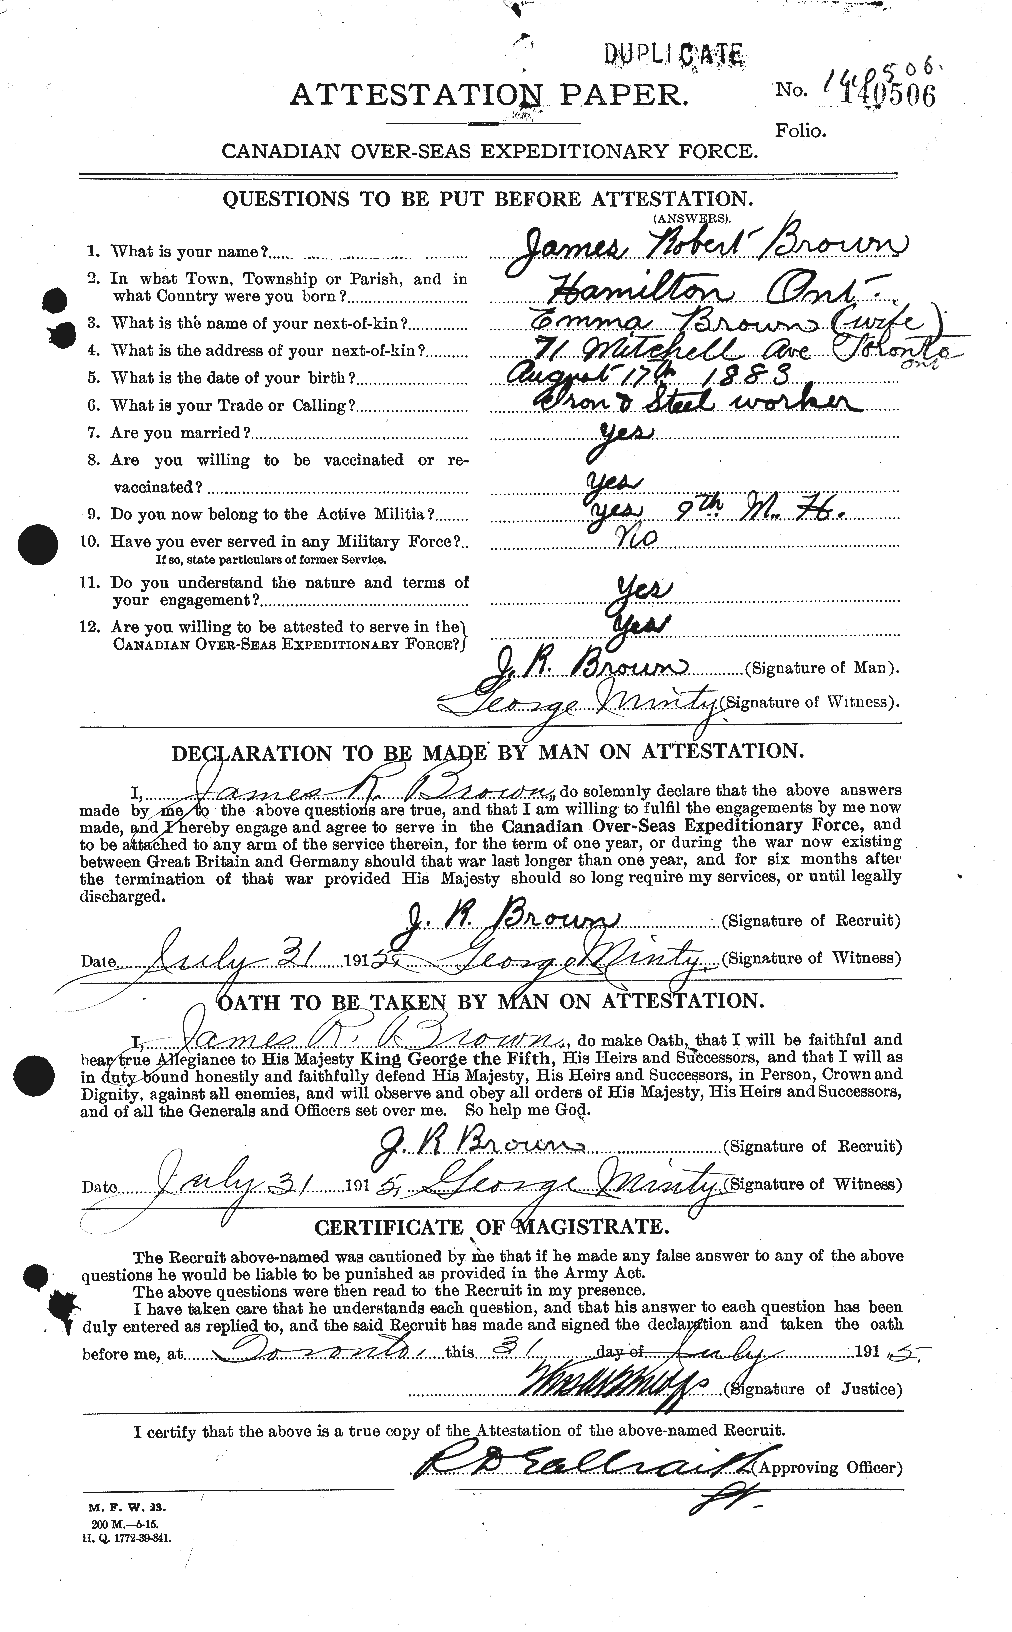 Personnel Records of the First World War - CEF 269579a